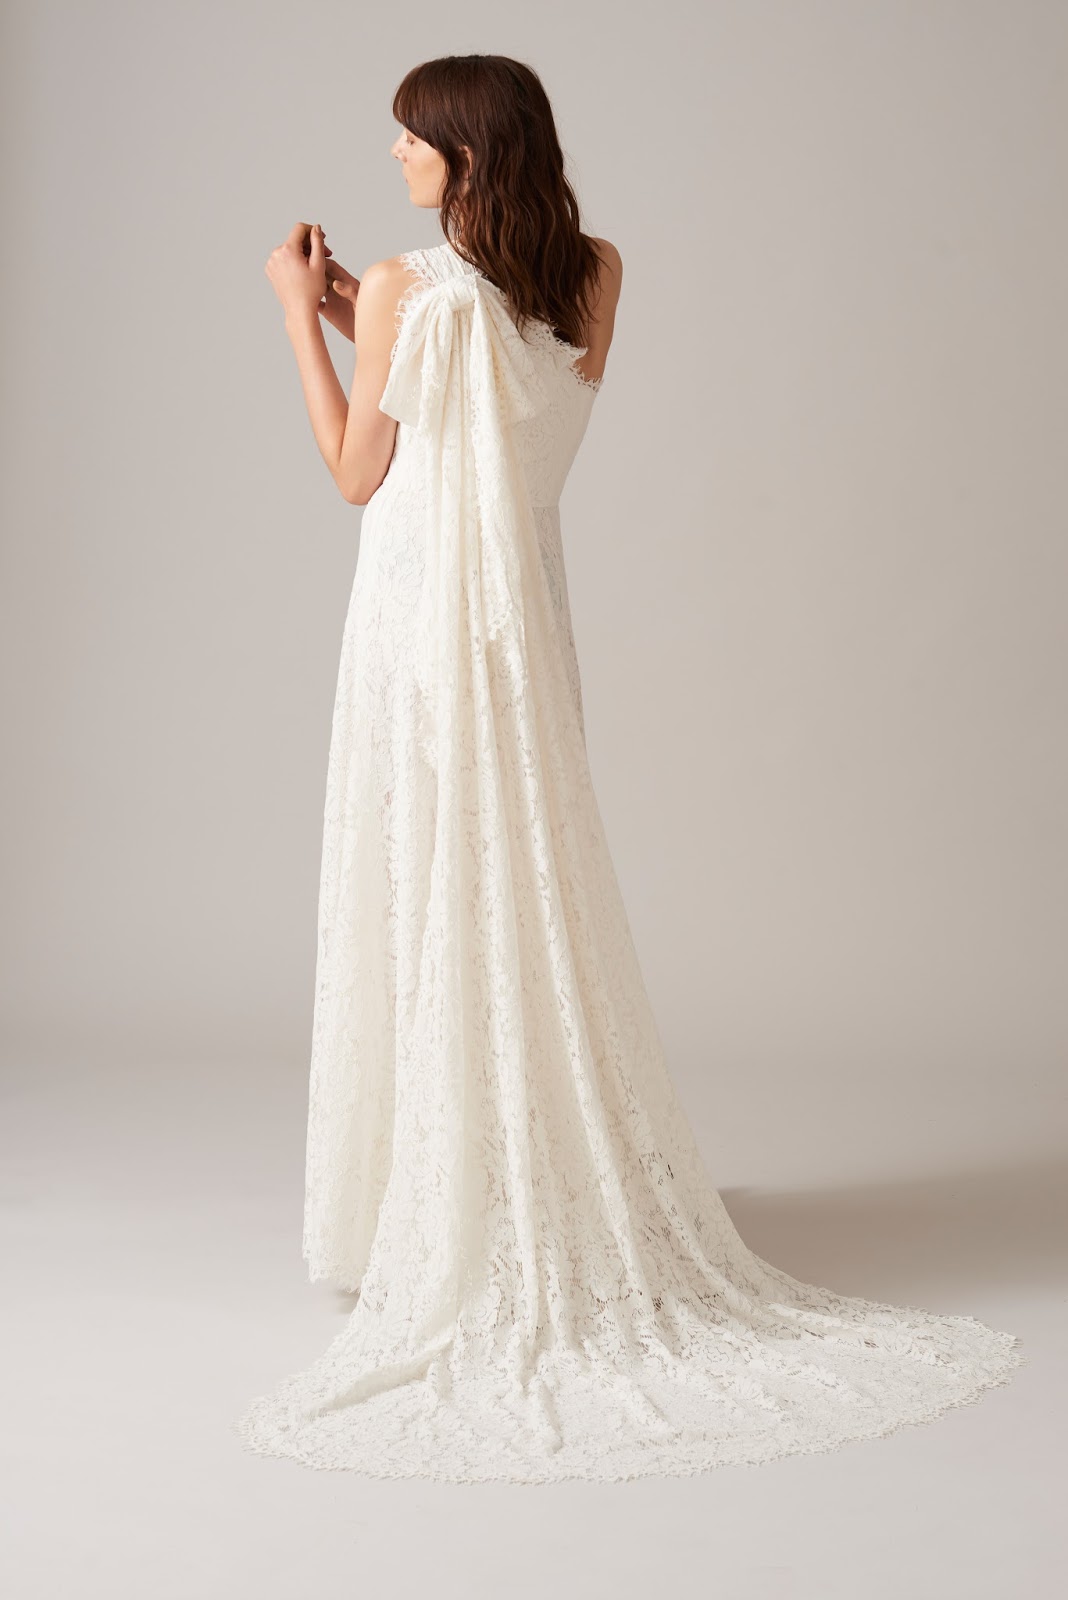 6 affordable bridal brands you need to know about…